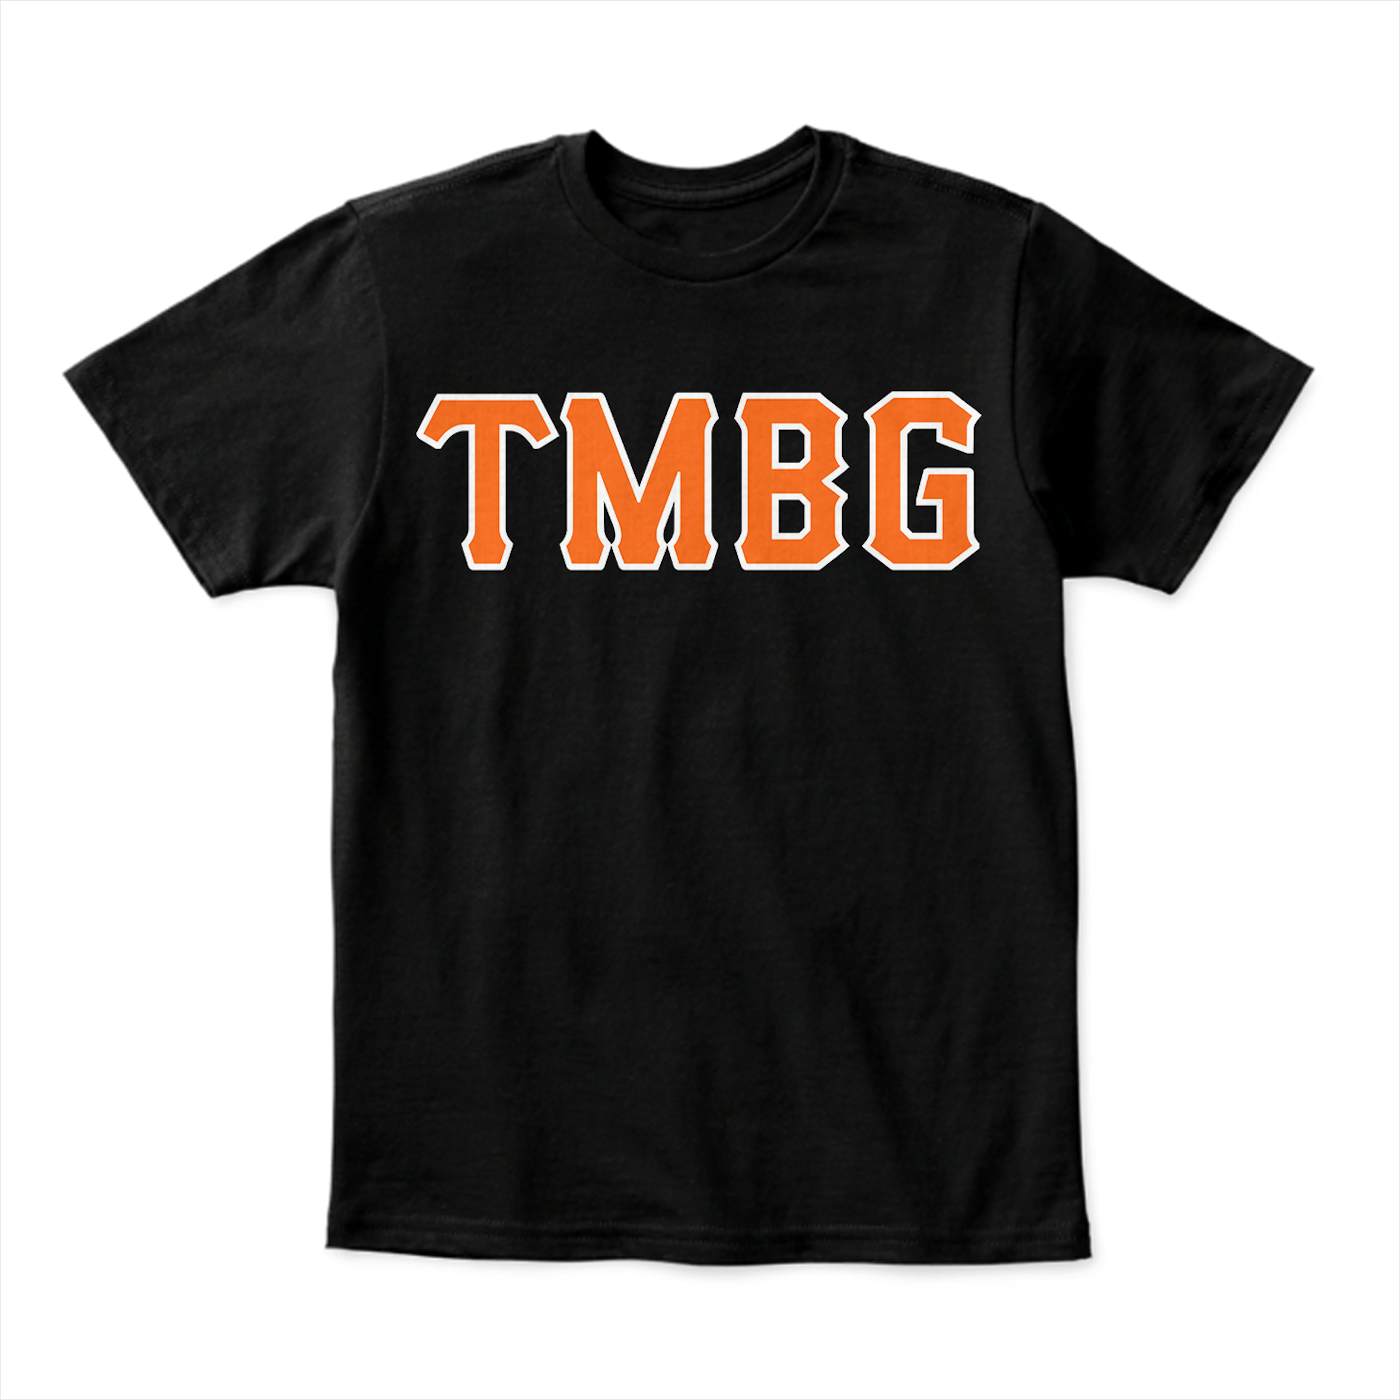 They Might Be Giants Baseball T-Shirt (Unisex)